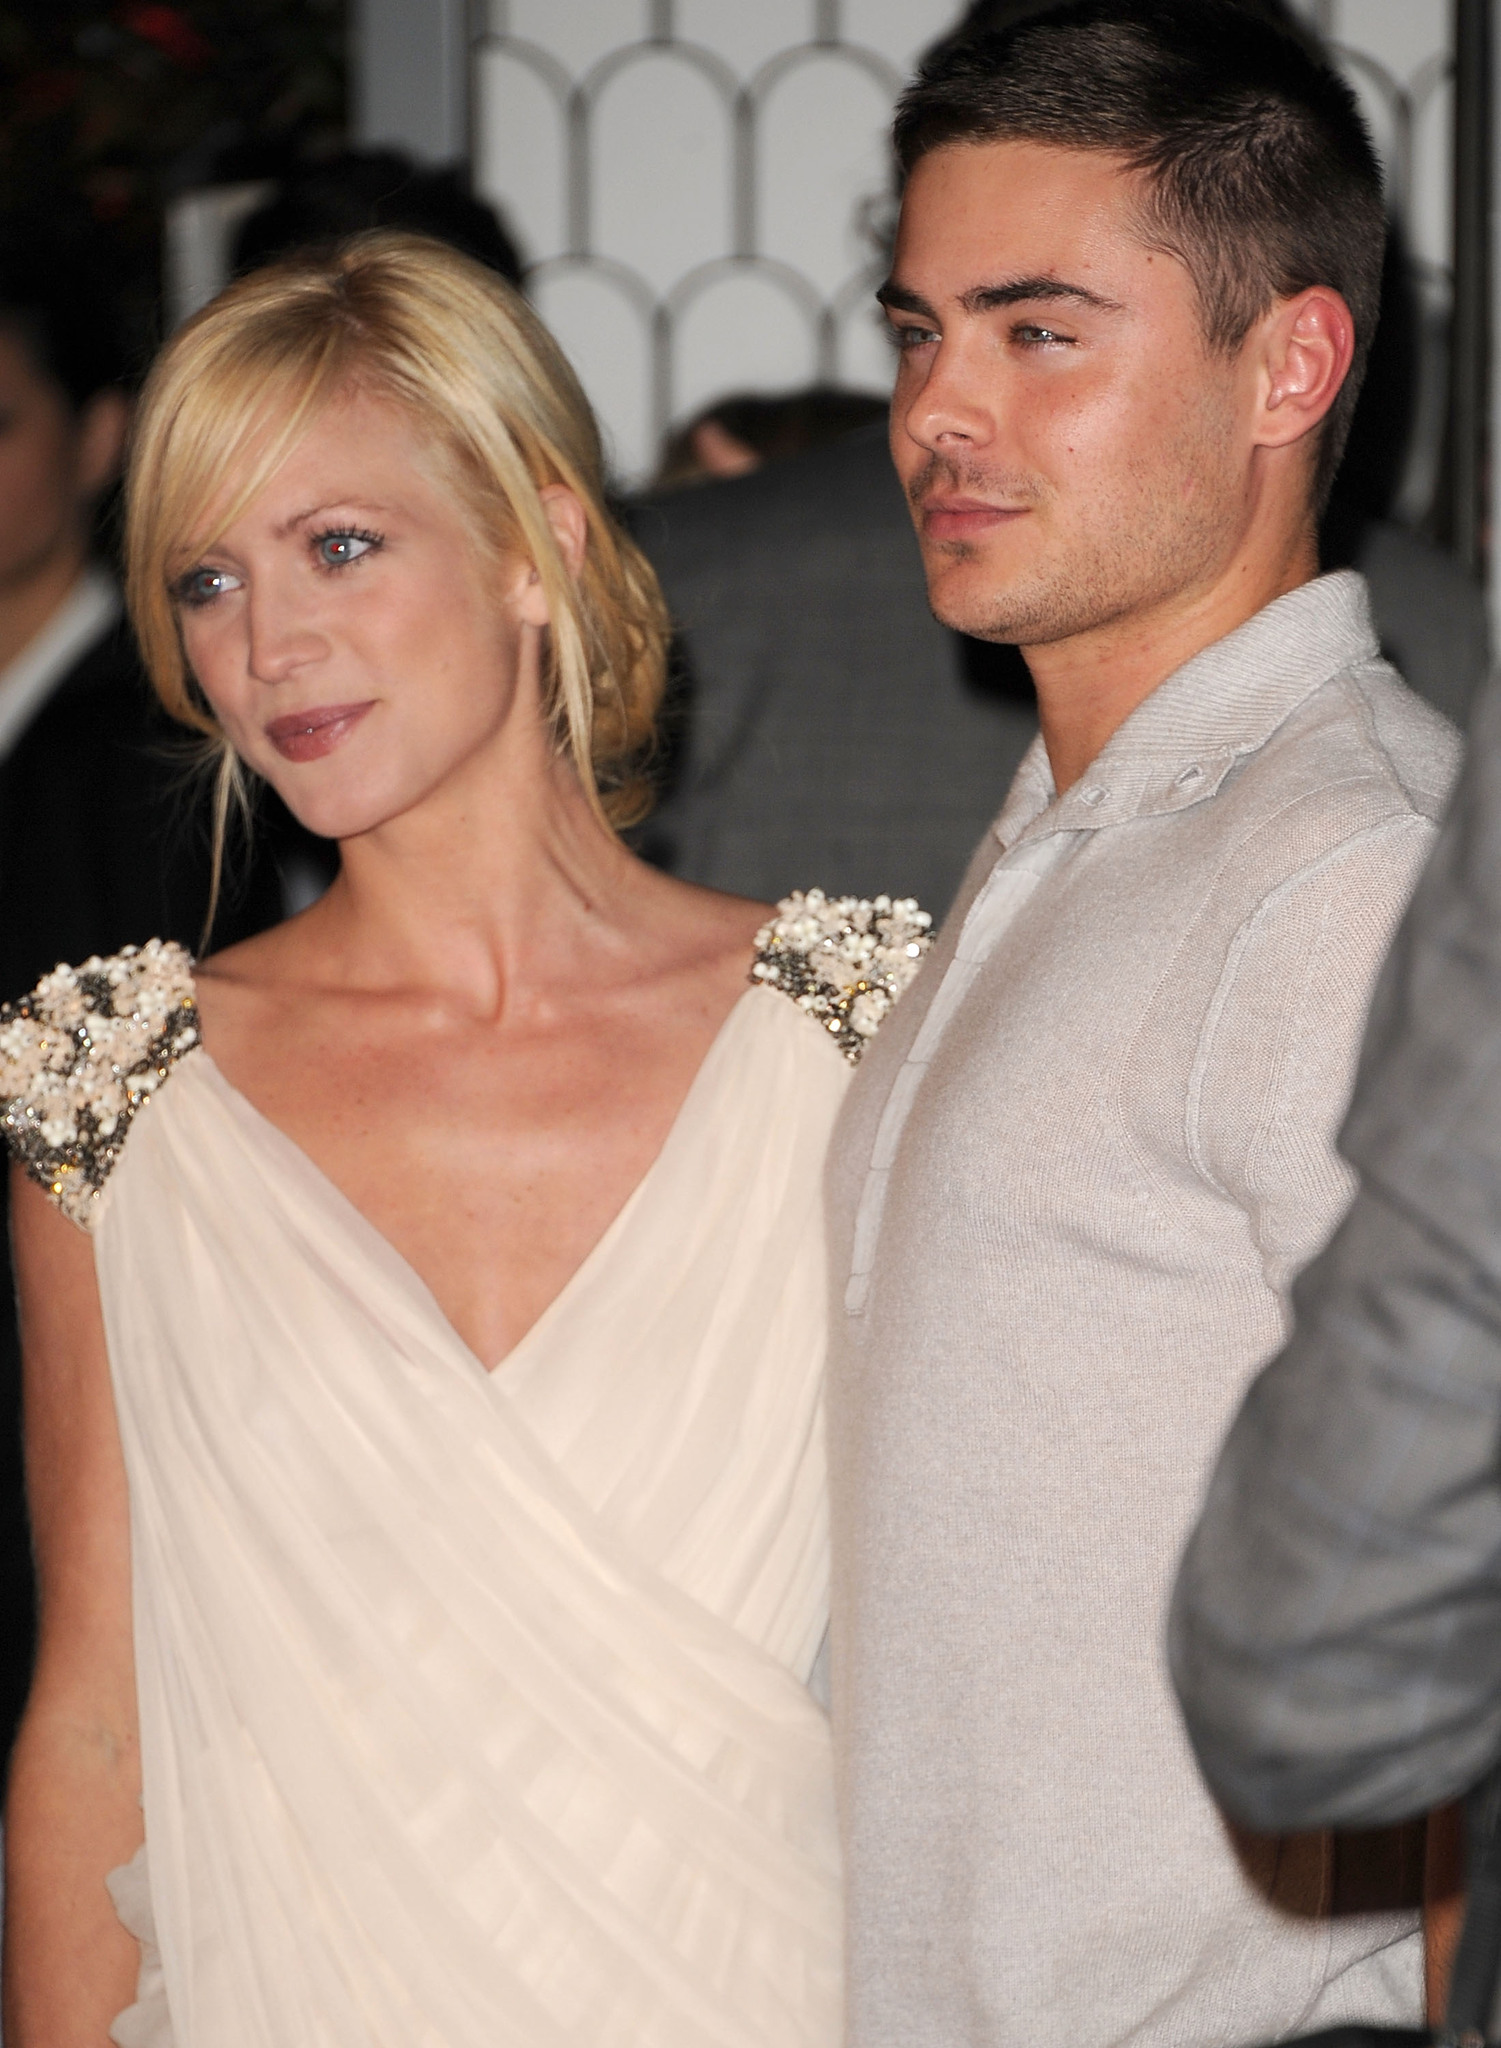 Brittany Snow and Zac Efron